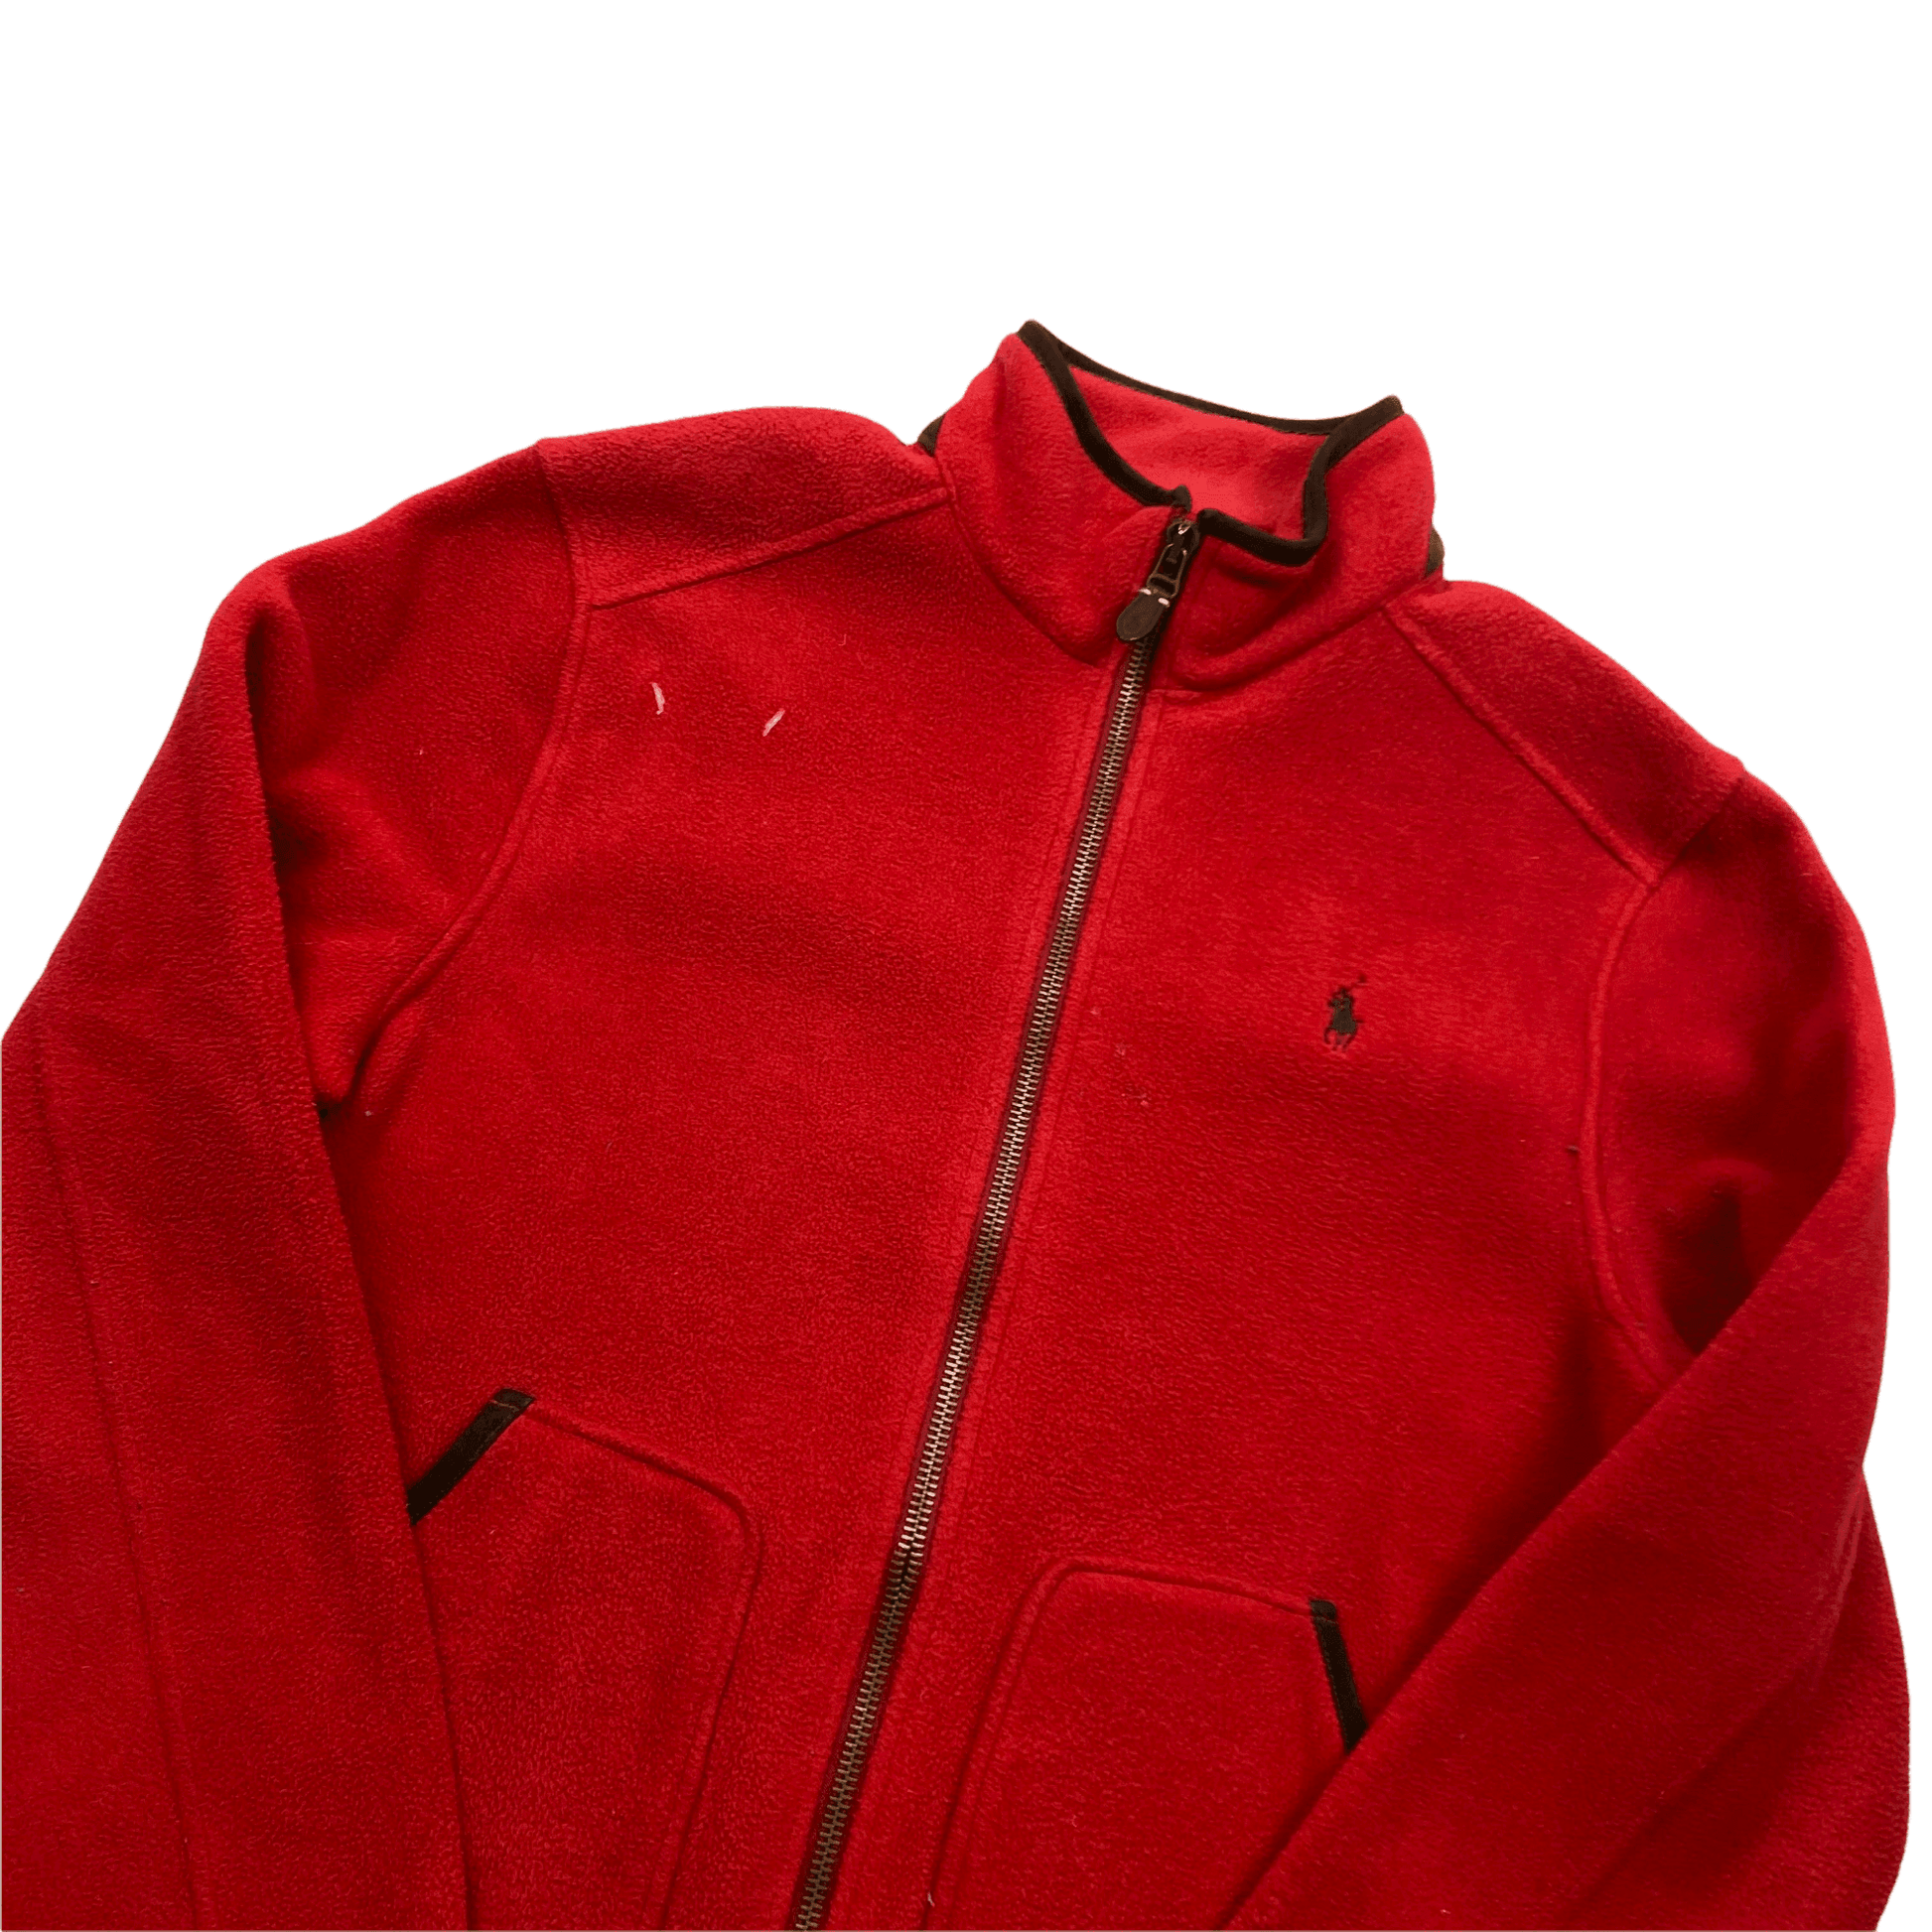 Vintage 90s Red Polo Ralph Lauren Fleece Jacket - Large (Recommended Size - Medium) - The Streetwear Studio